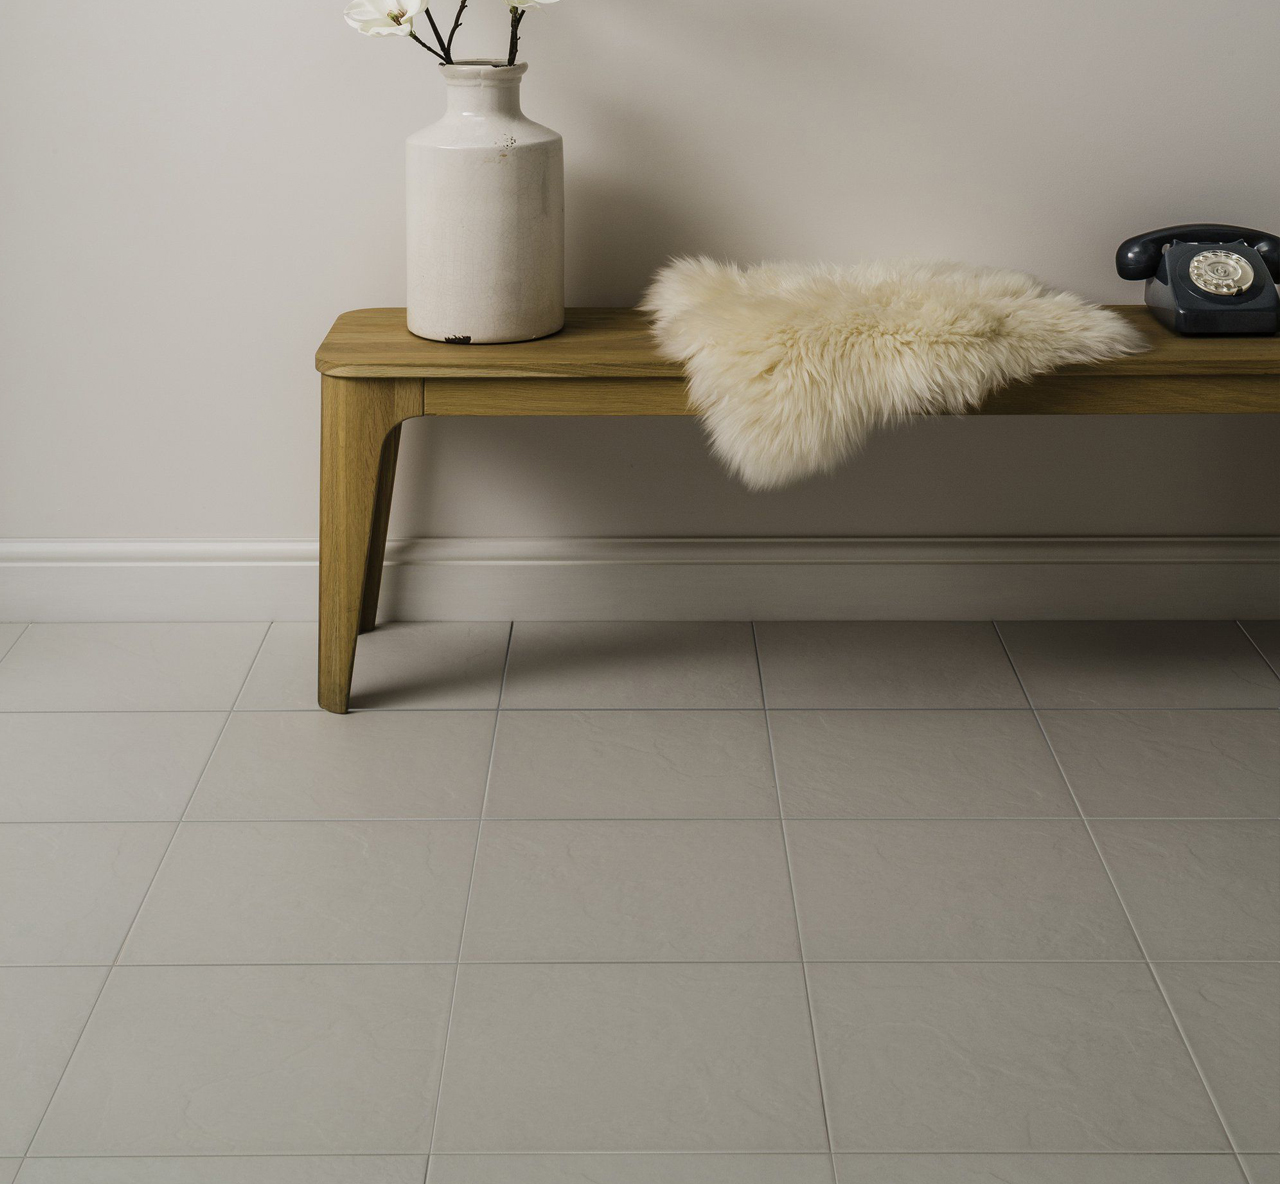 Johnsons Lagos White Slate Effect Porcelain Tiles used in a light hallways with furniture and a potted plant